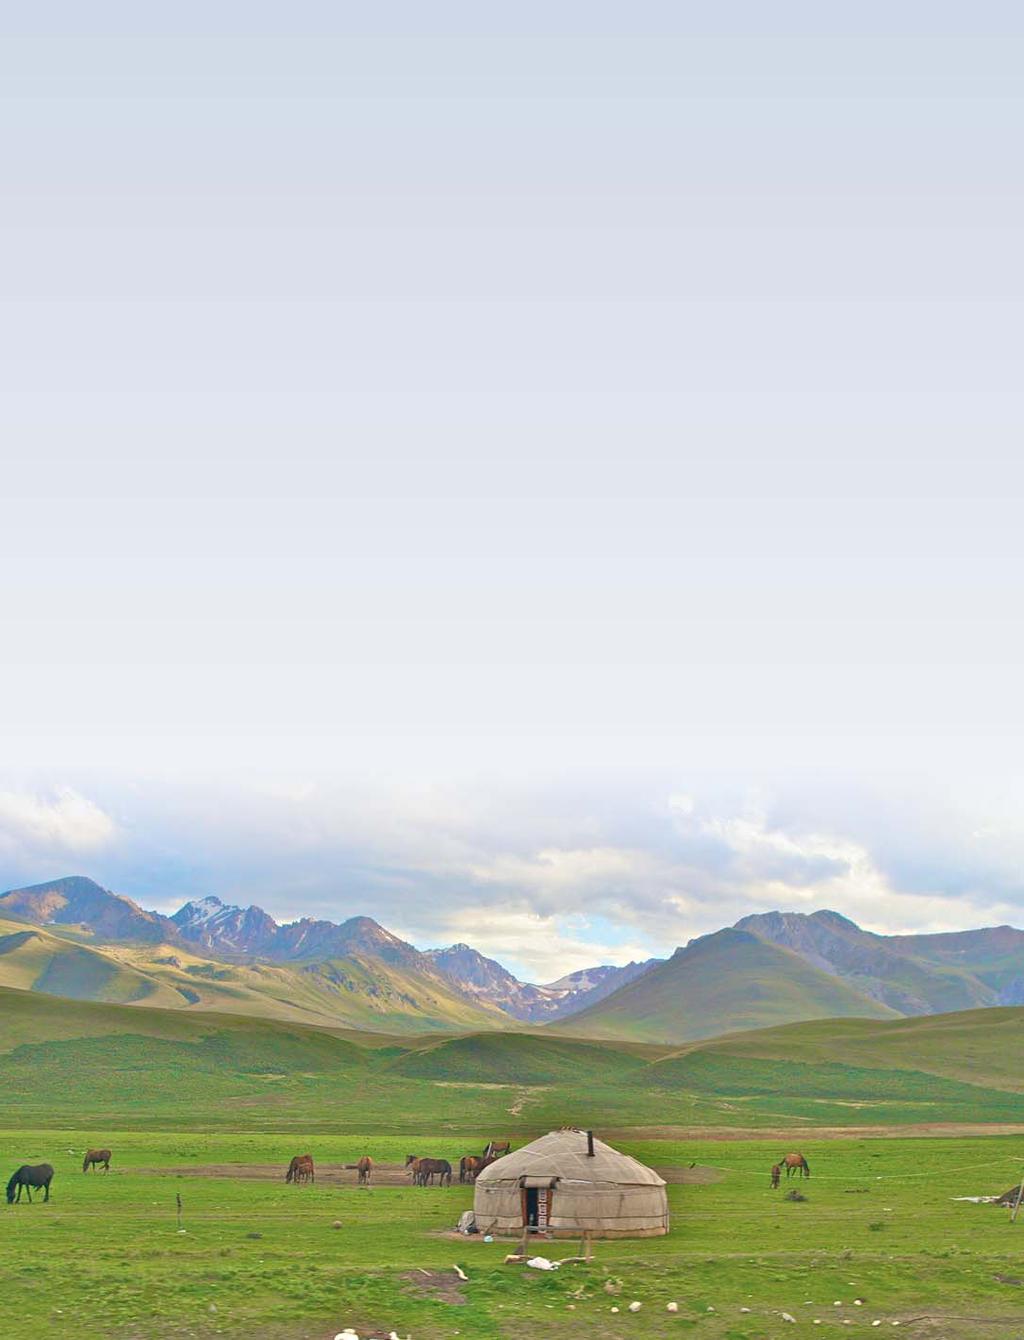 Yurts Mobile Homes of Central Asia WHAT is soft and round and keeps you warm in winter but cool in summer? For nomadic peoples in parts of Central Asia, the answer is, A yurt!